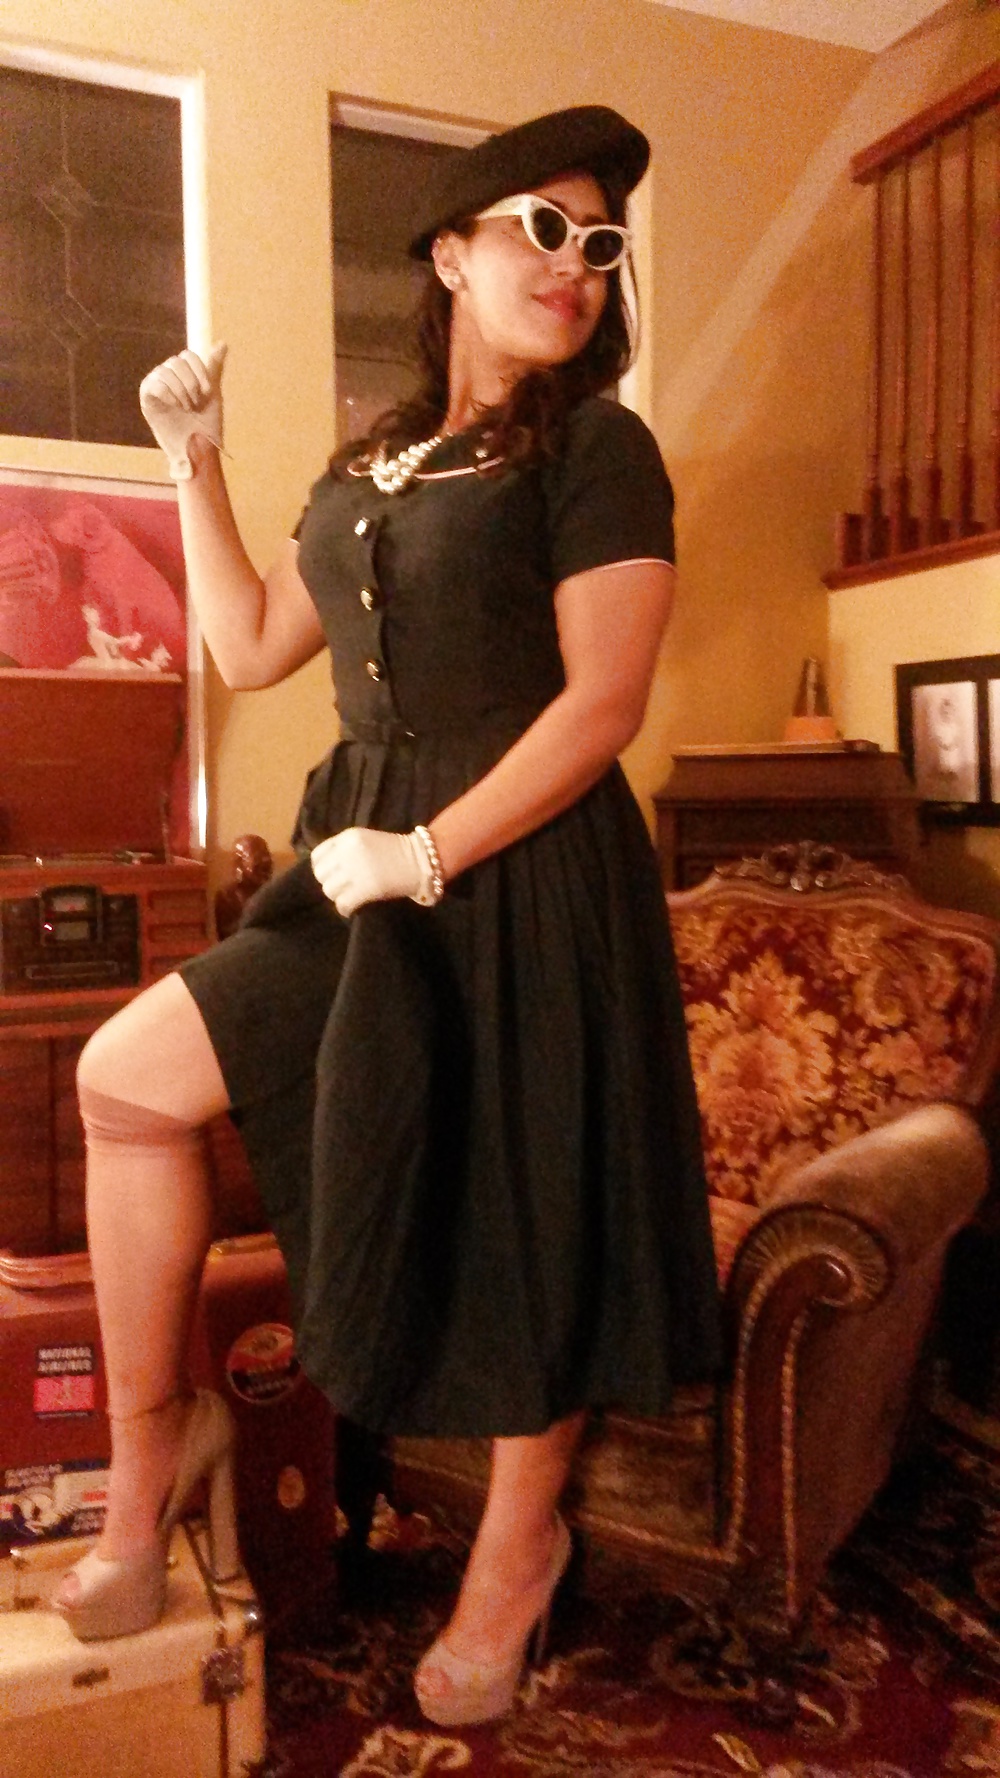 Porn image Pin-up girl in real vintage dress, gloves and stockings